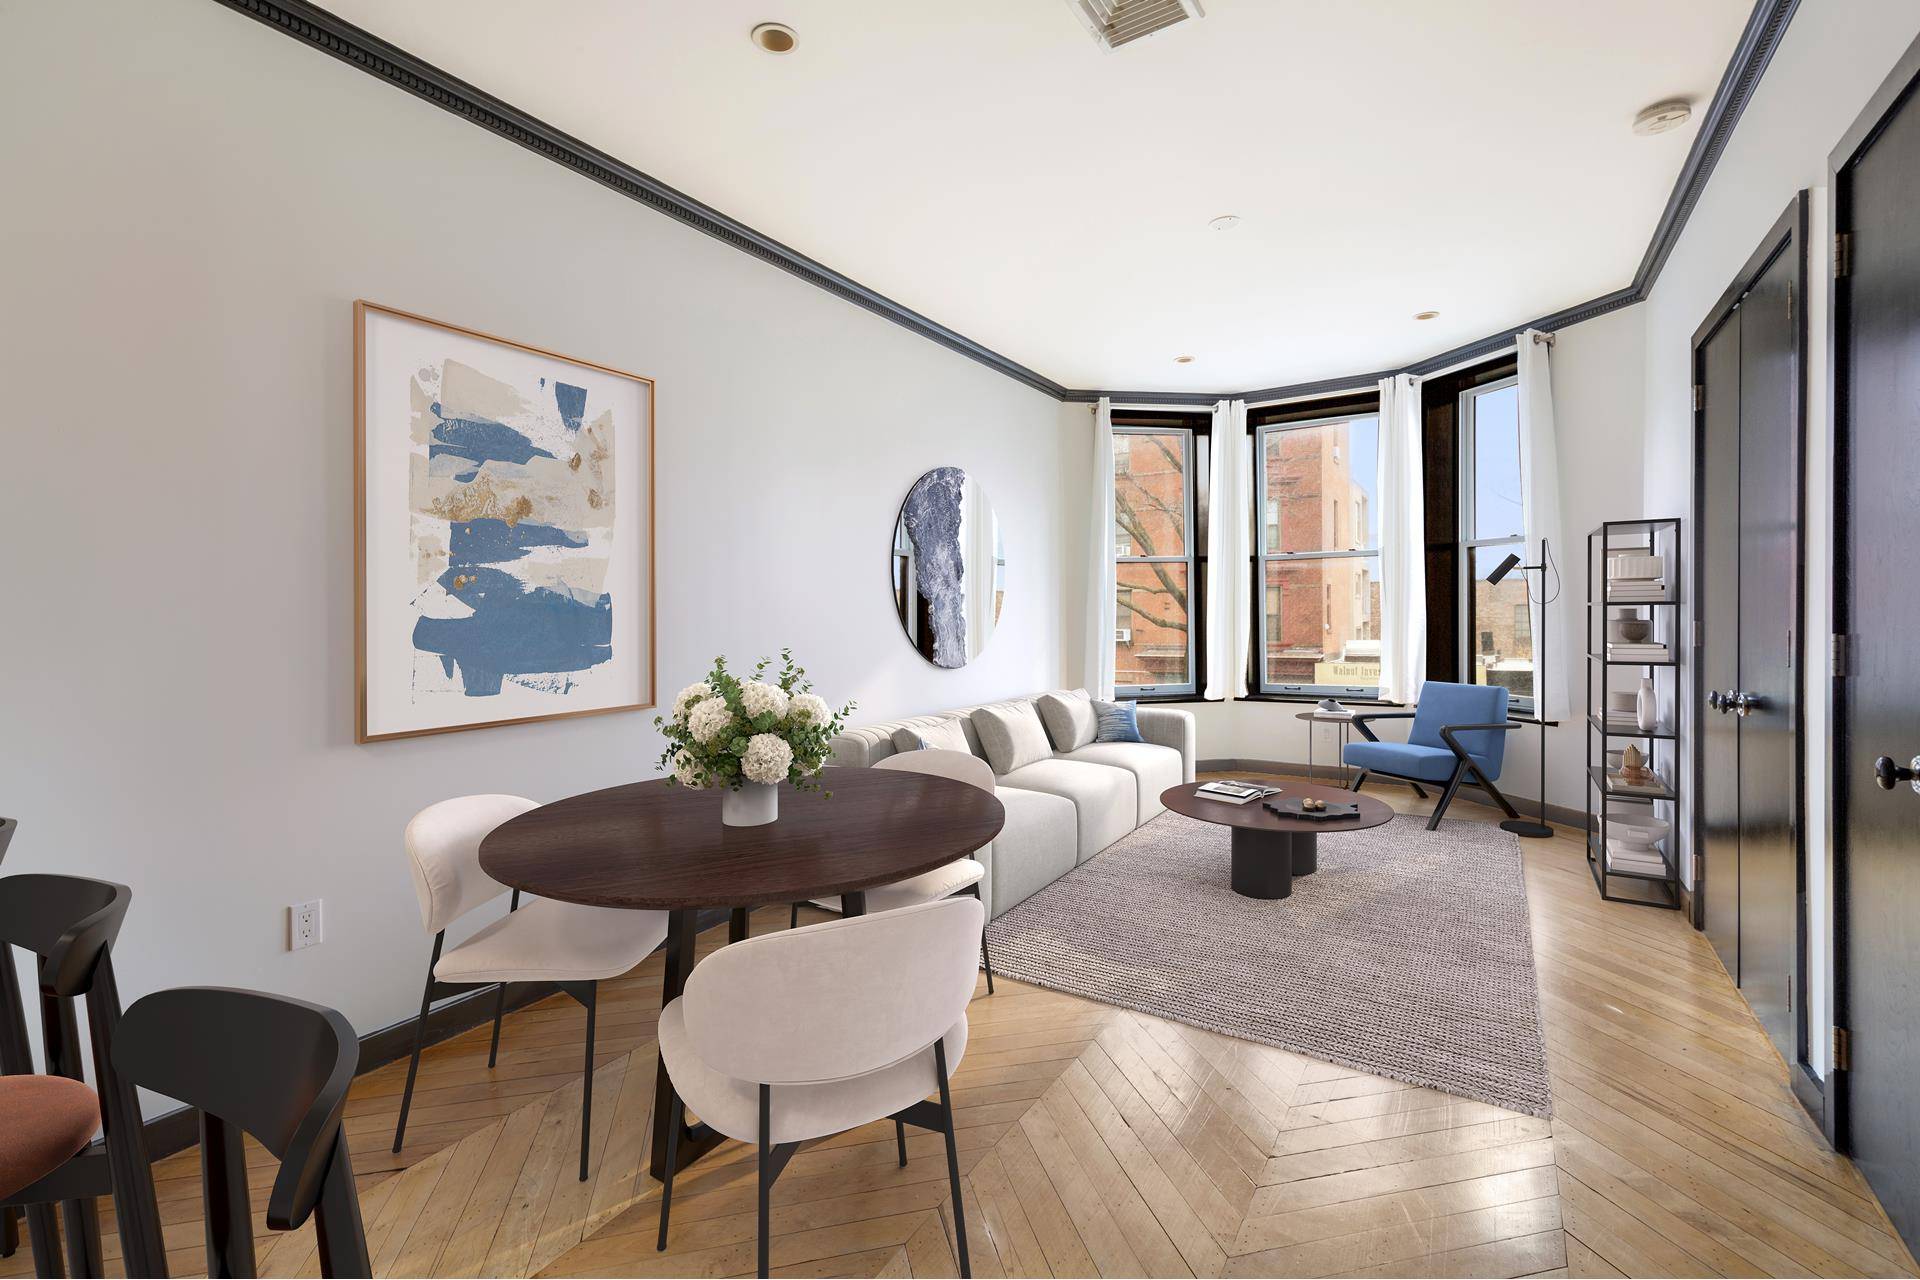 Walk up the brownstone steps, through traditional double doors, and up just one flight to your custom three bedroom, two bath apartment designed by the award winning design firm, The ...